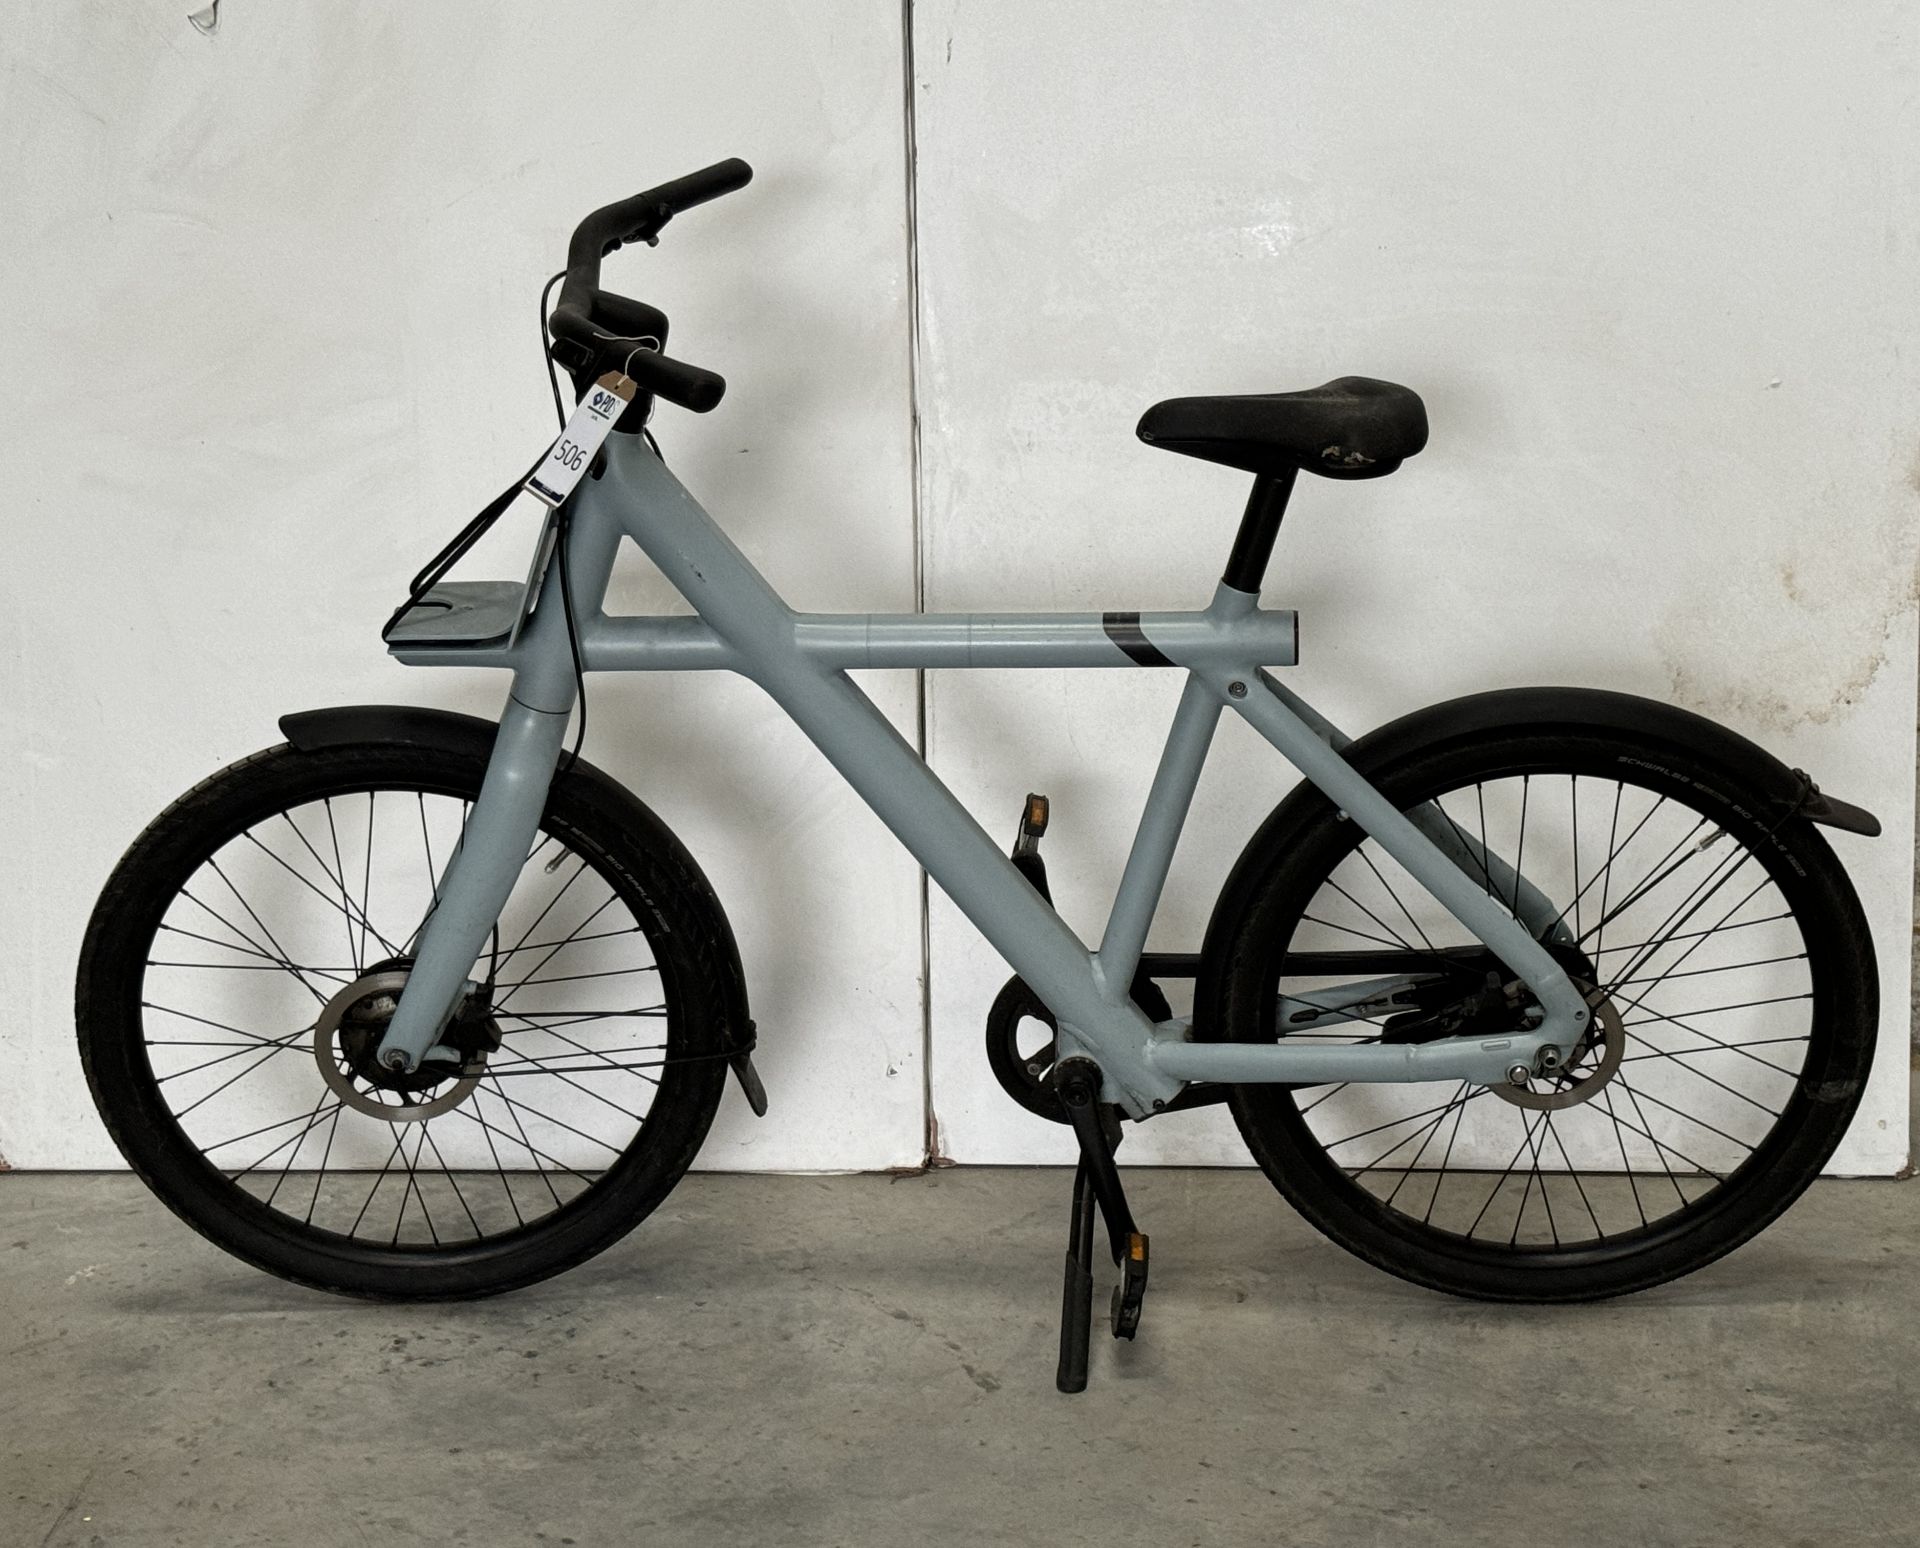 VanMoof X3 Electric Bike, Frame Number ASY2003166 (NOT ROADWORTHY - FOR SPARES ONLY) (No codes